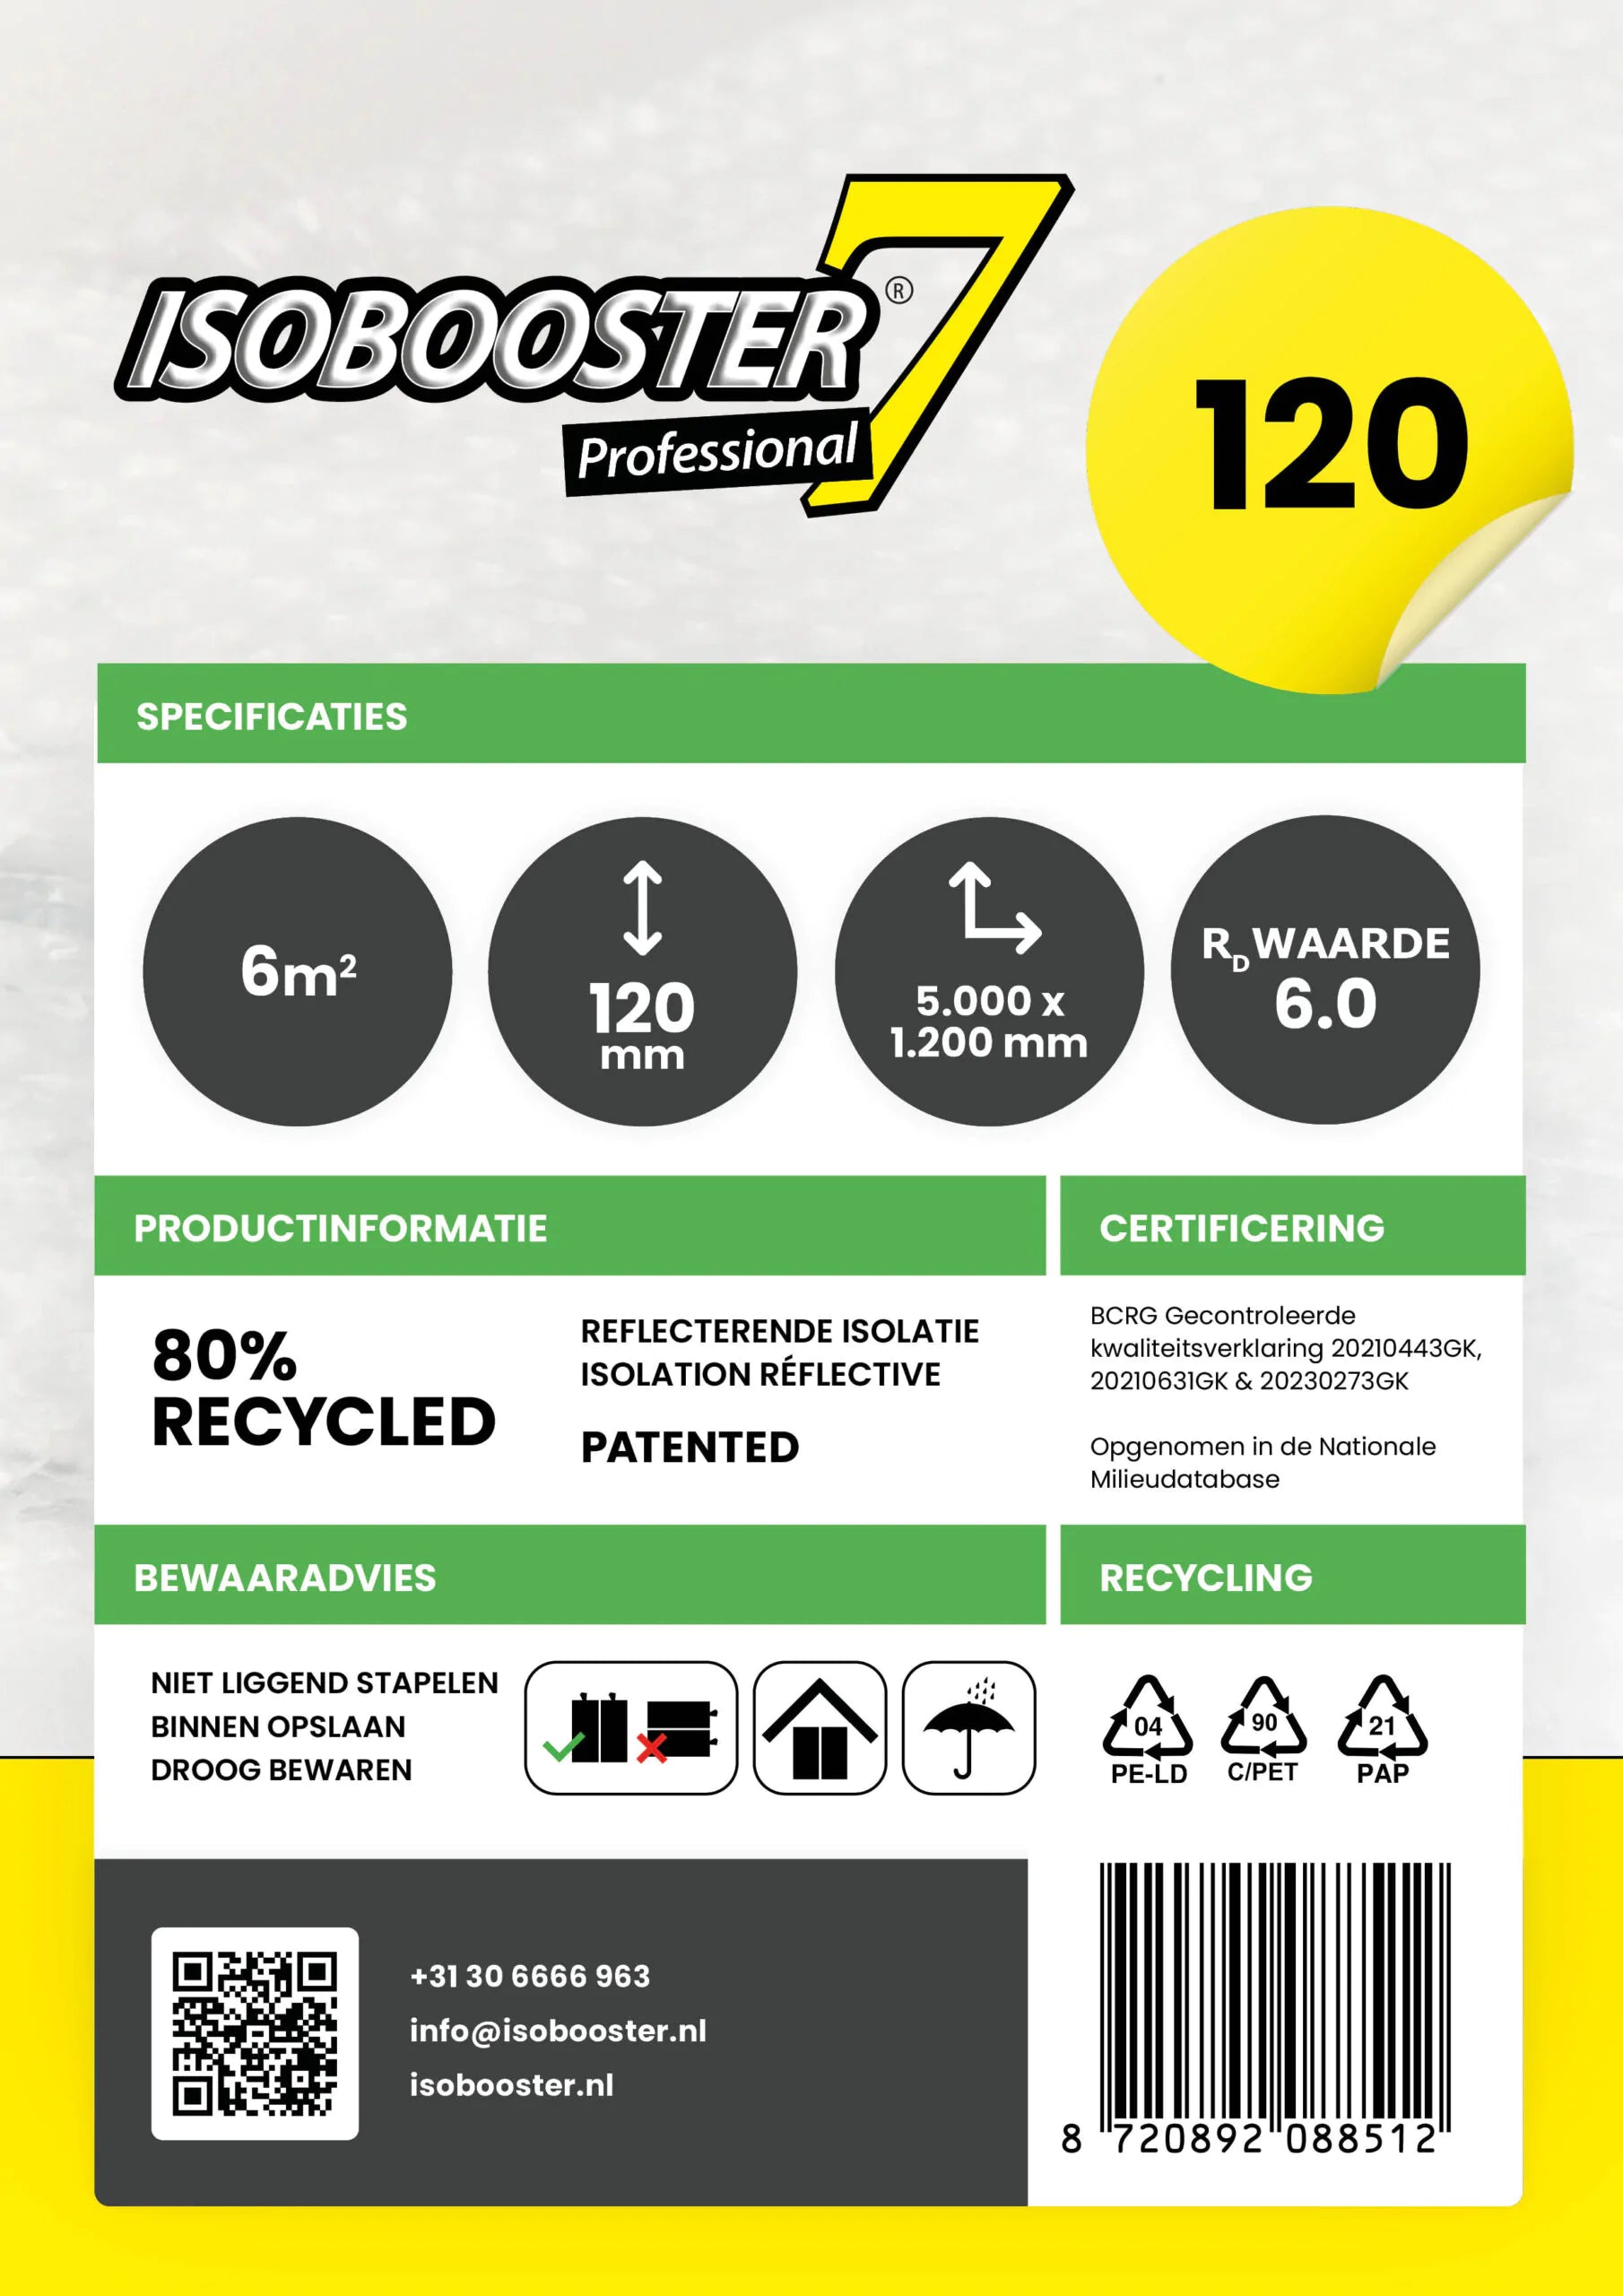 Isobooster Professionnel 120mm